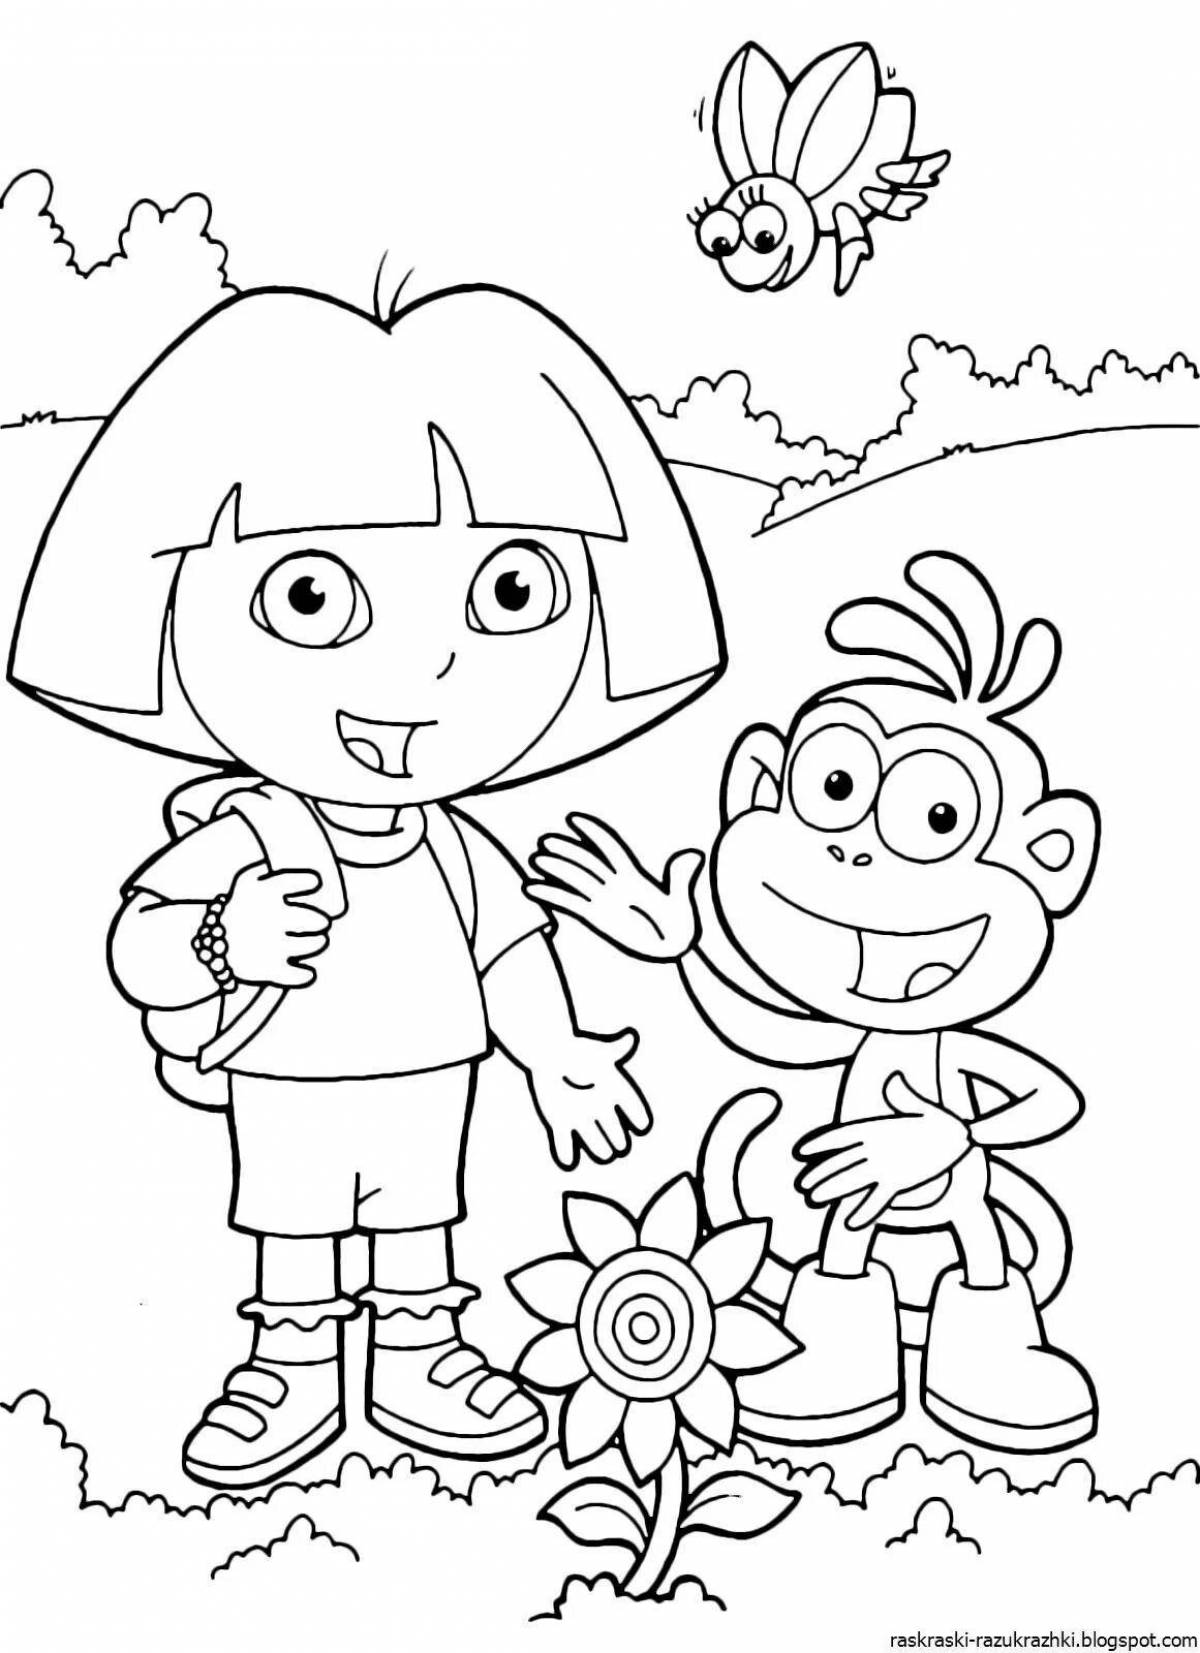 Great coloring book popular with kids